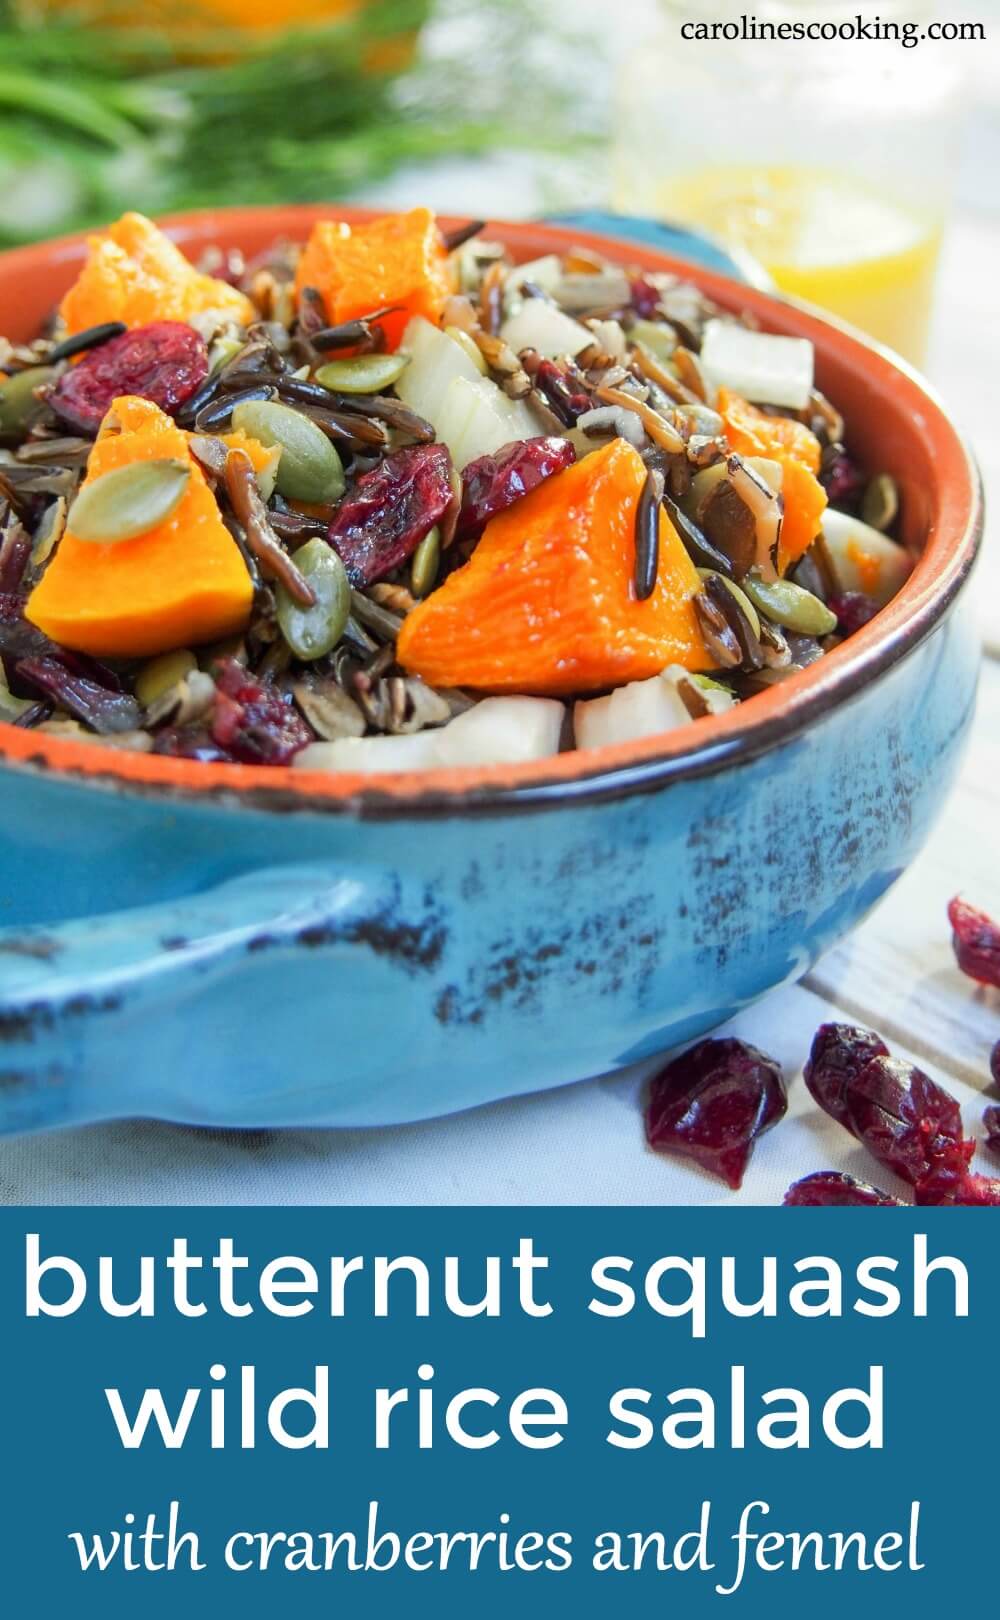 Easy to make, colorful and flavorful, this butternut squash wild rice salad with cranberries and fennel would be perfect for a potluck, on a Holiday table or in your lunch box.  It's perfect for making ahead, not too heavy but filling enough to make a light meal.  So many possibilities to enjoy!  #potluck #salad #thanksgiving #vegetarian #wildrice